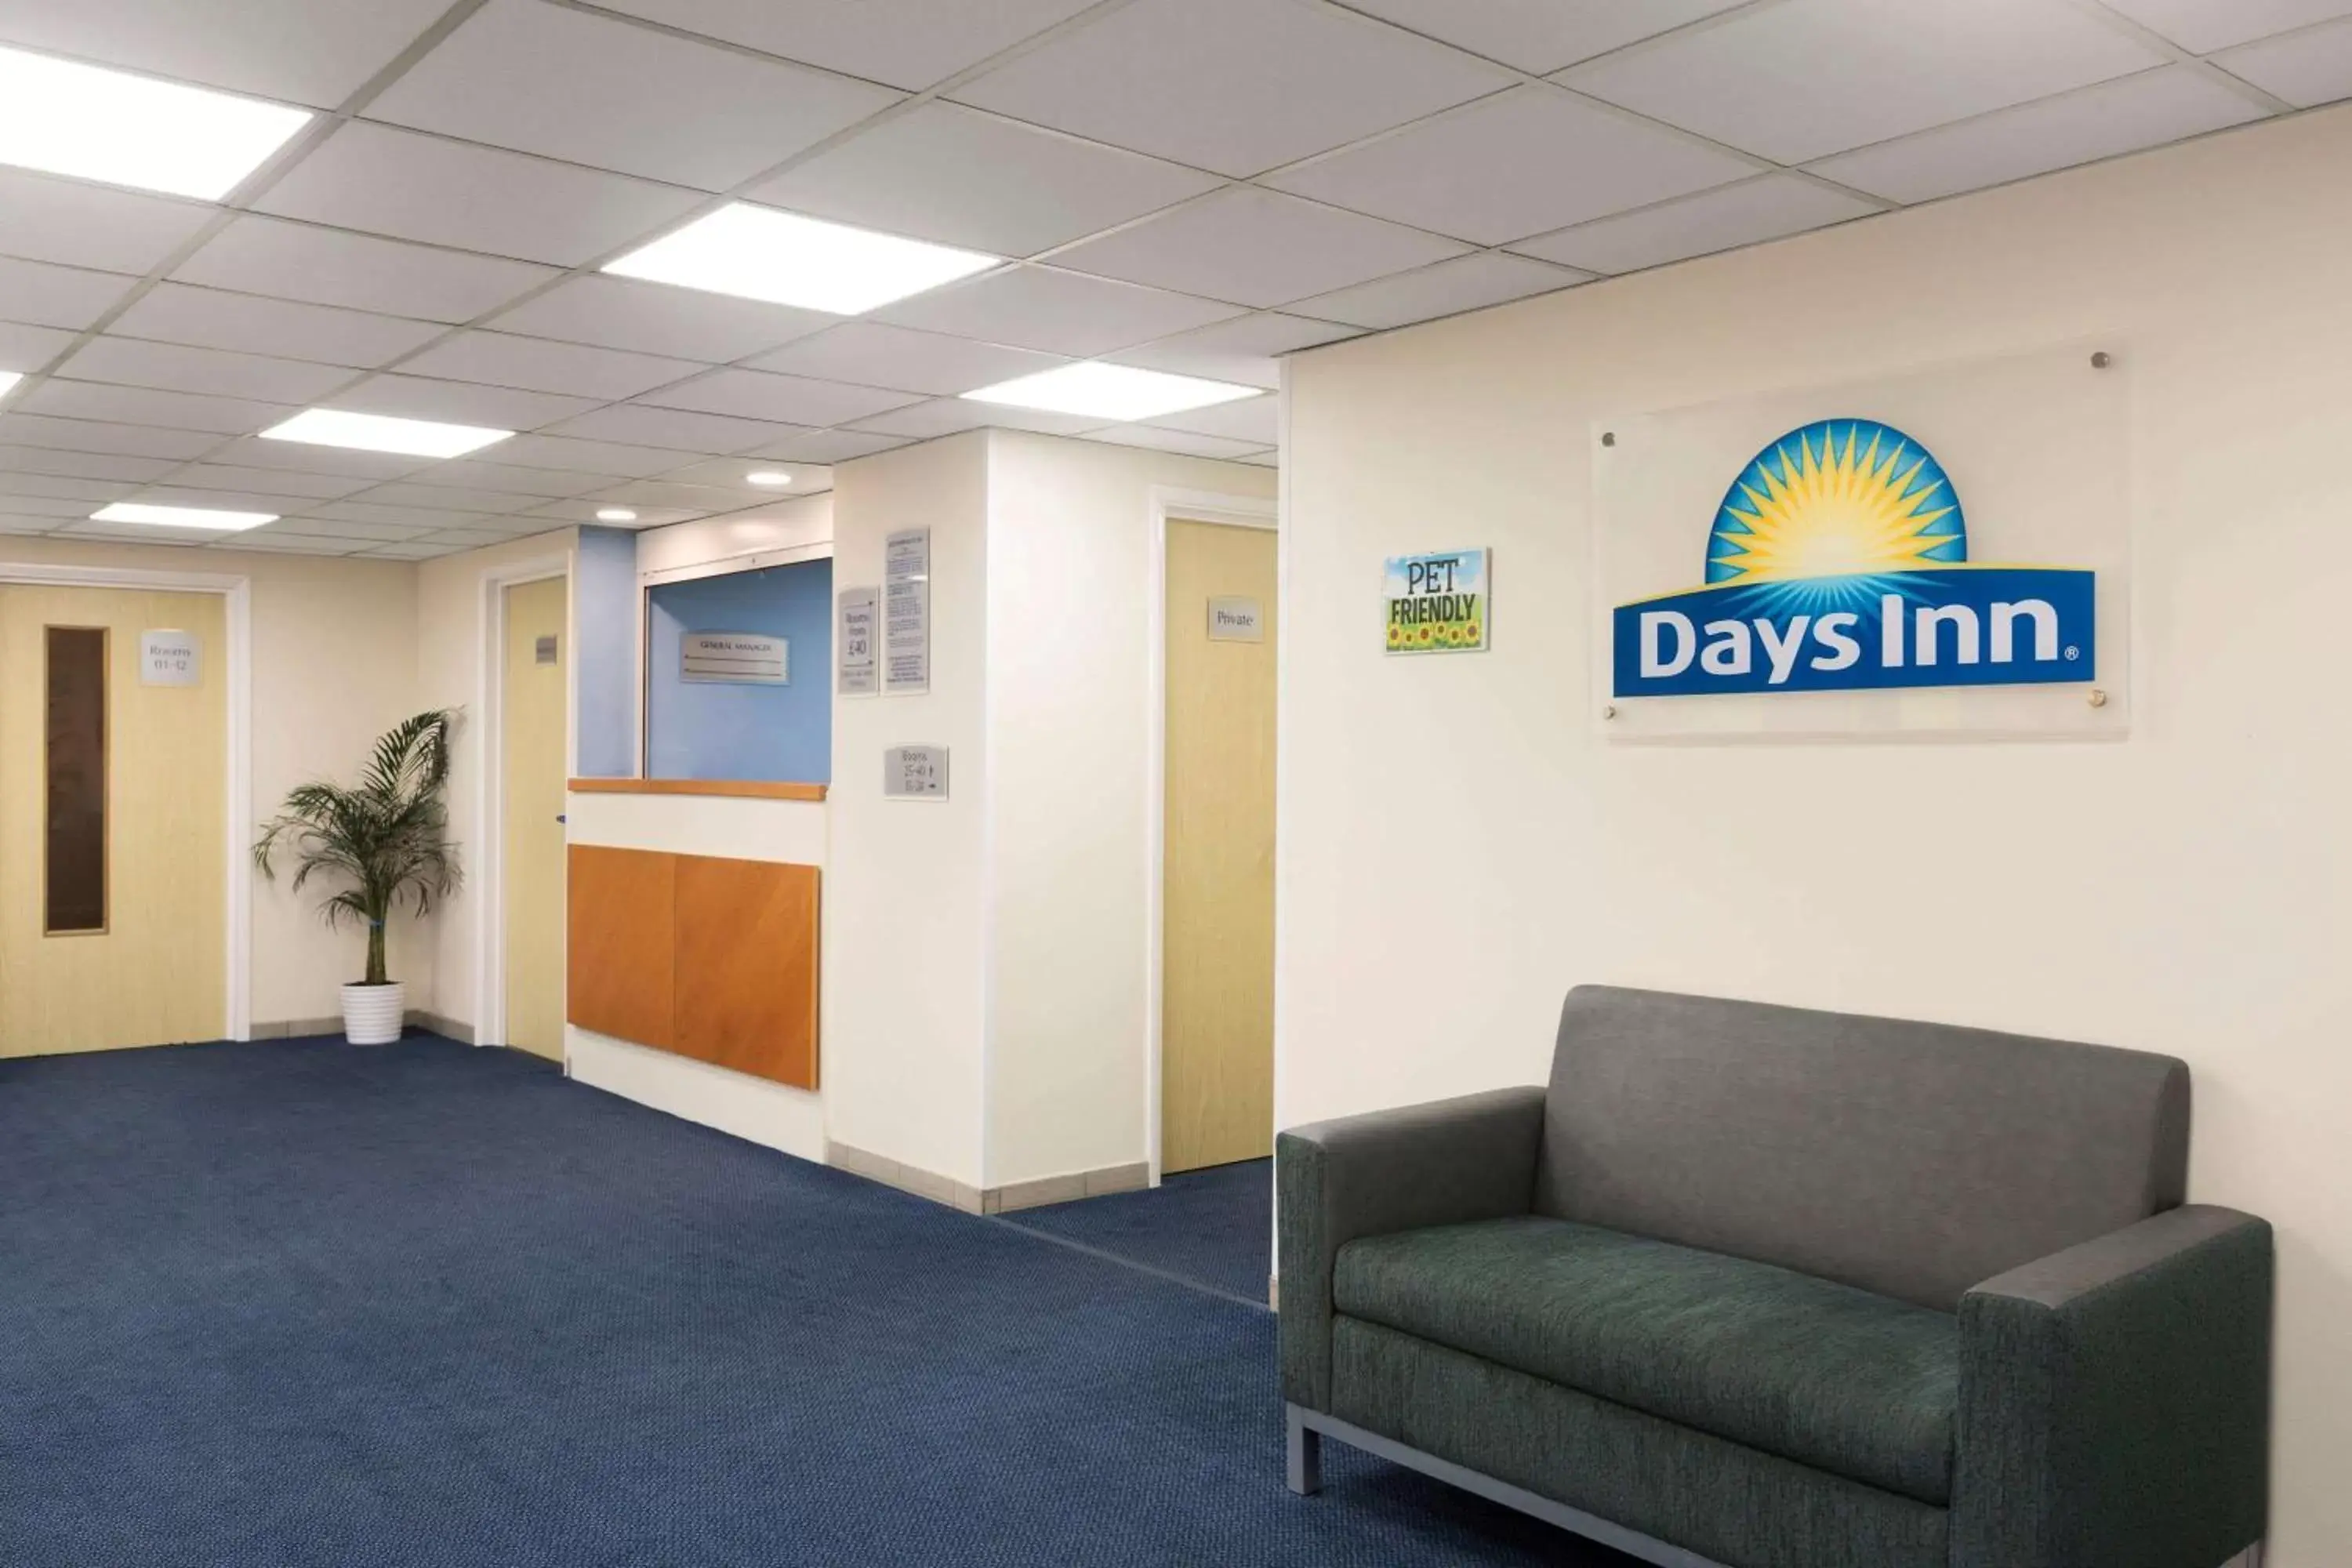 Lobby or reception in Days Inn Sutton Scotney South